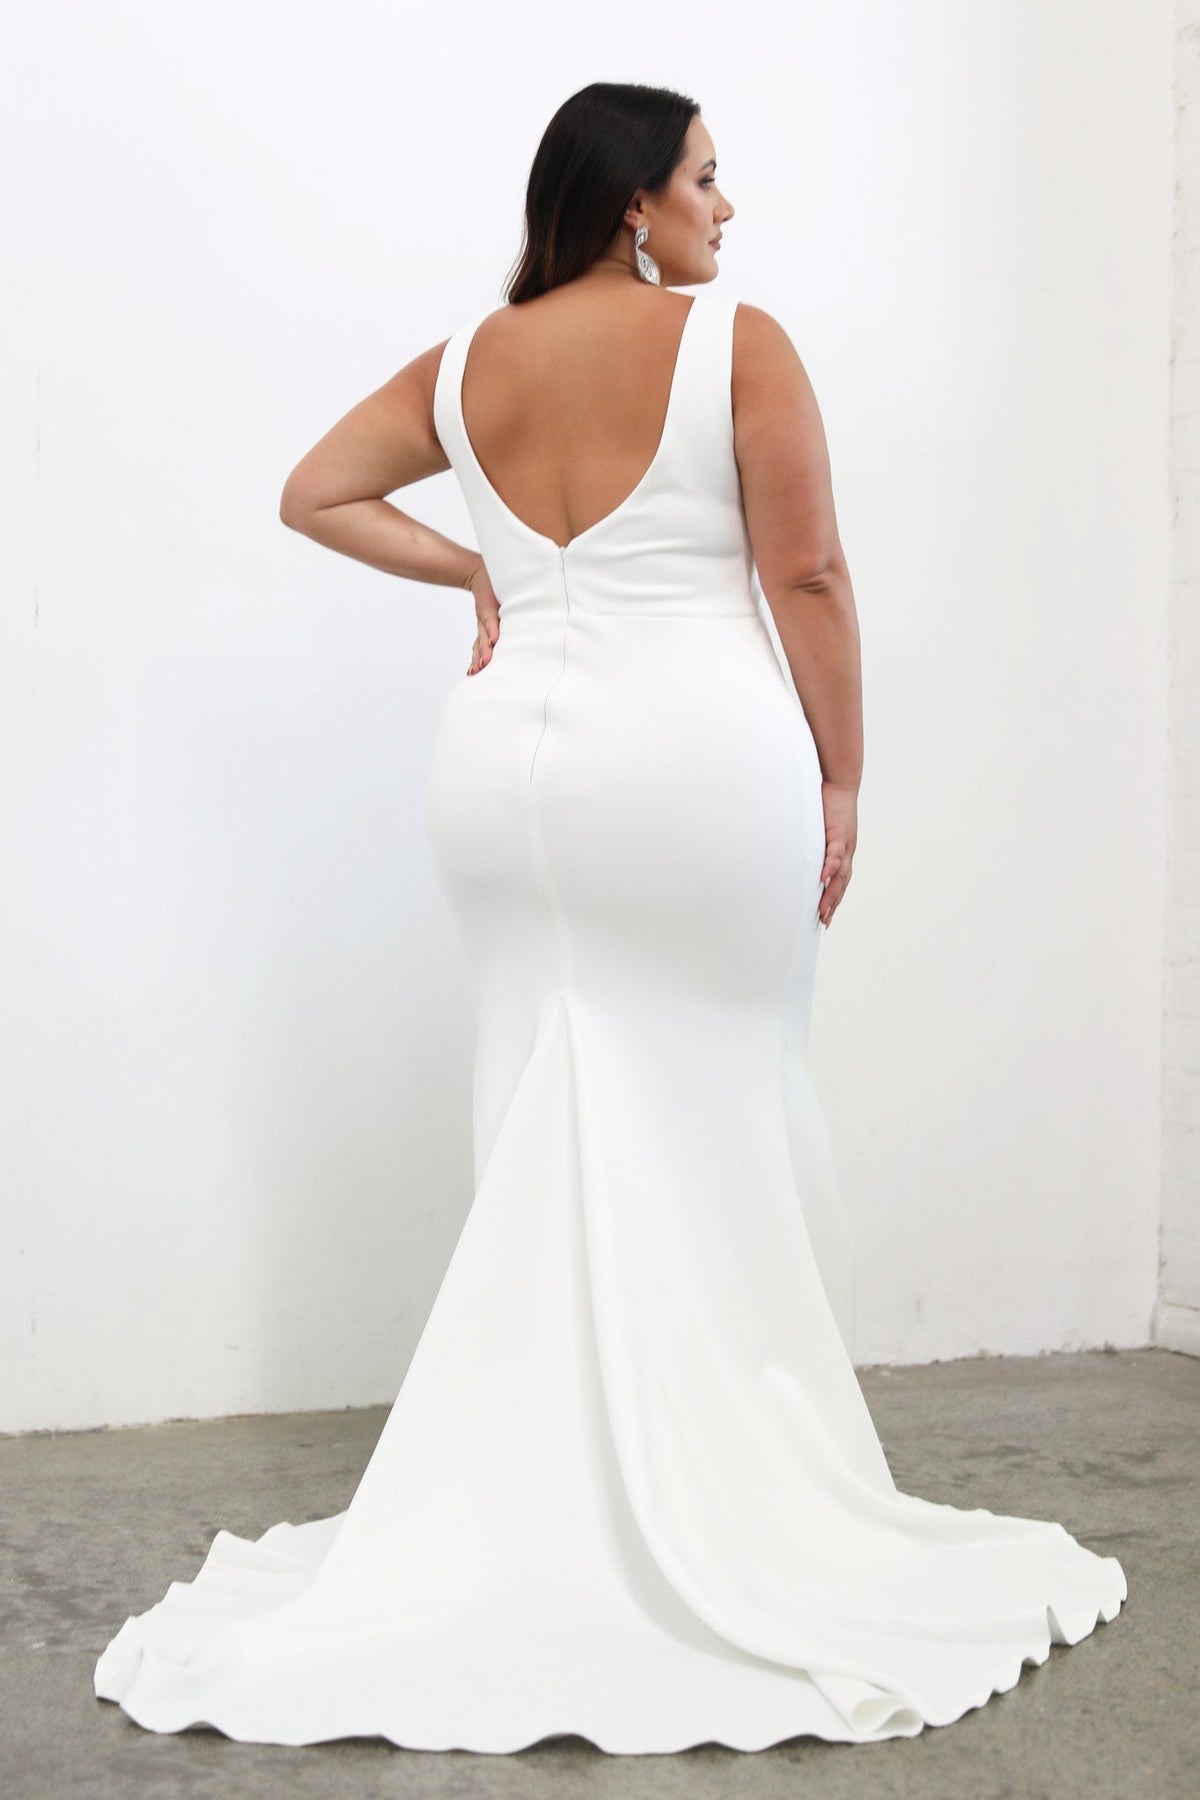 Open V-Shape Back Design of Plus Size Fitted Crepe Wedding Dress in Mermaid Silhouette with V-Neckline, Medium Long Train in Ivory Colour